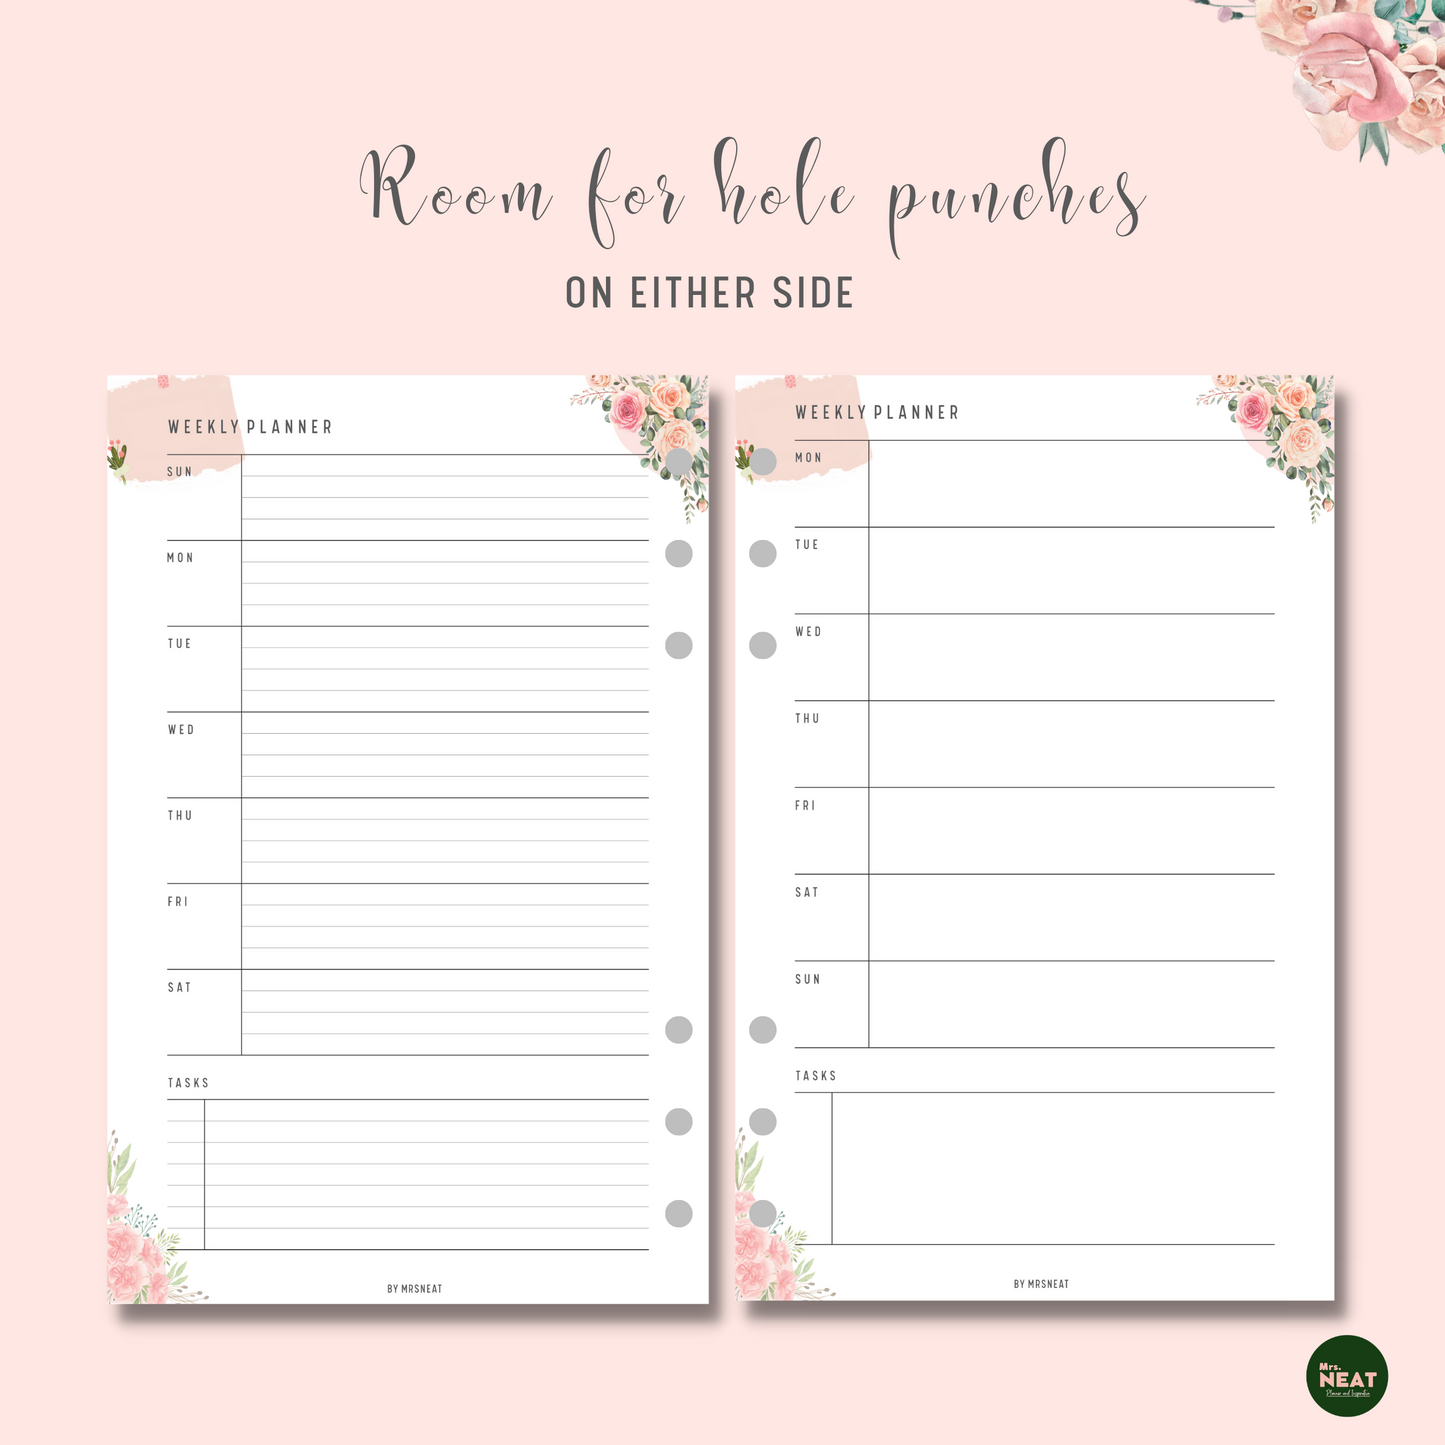 Beautiful Floral Weekly Planner with room for hole punches on either side